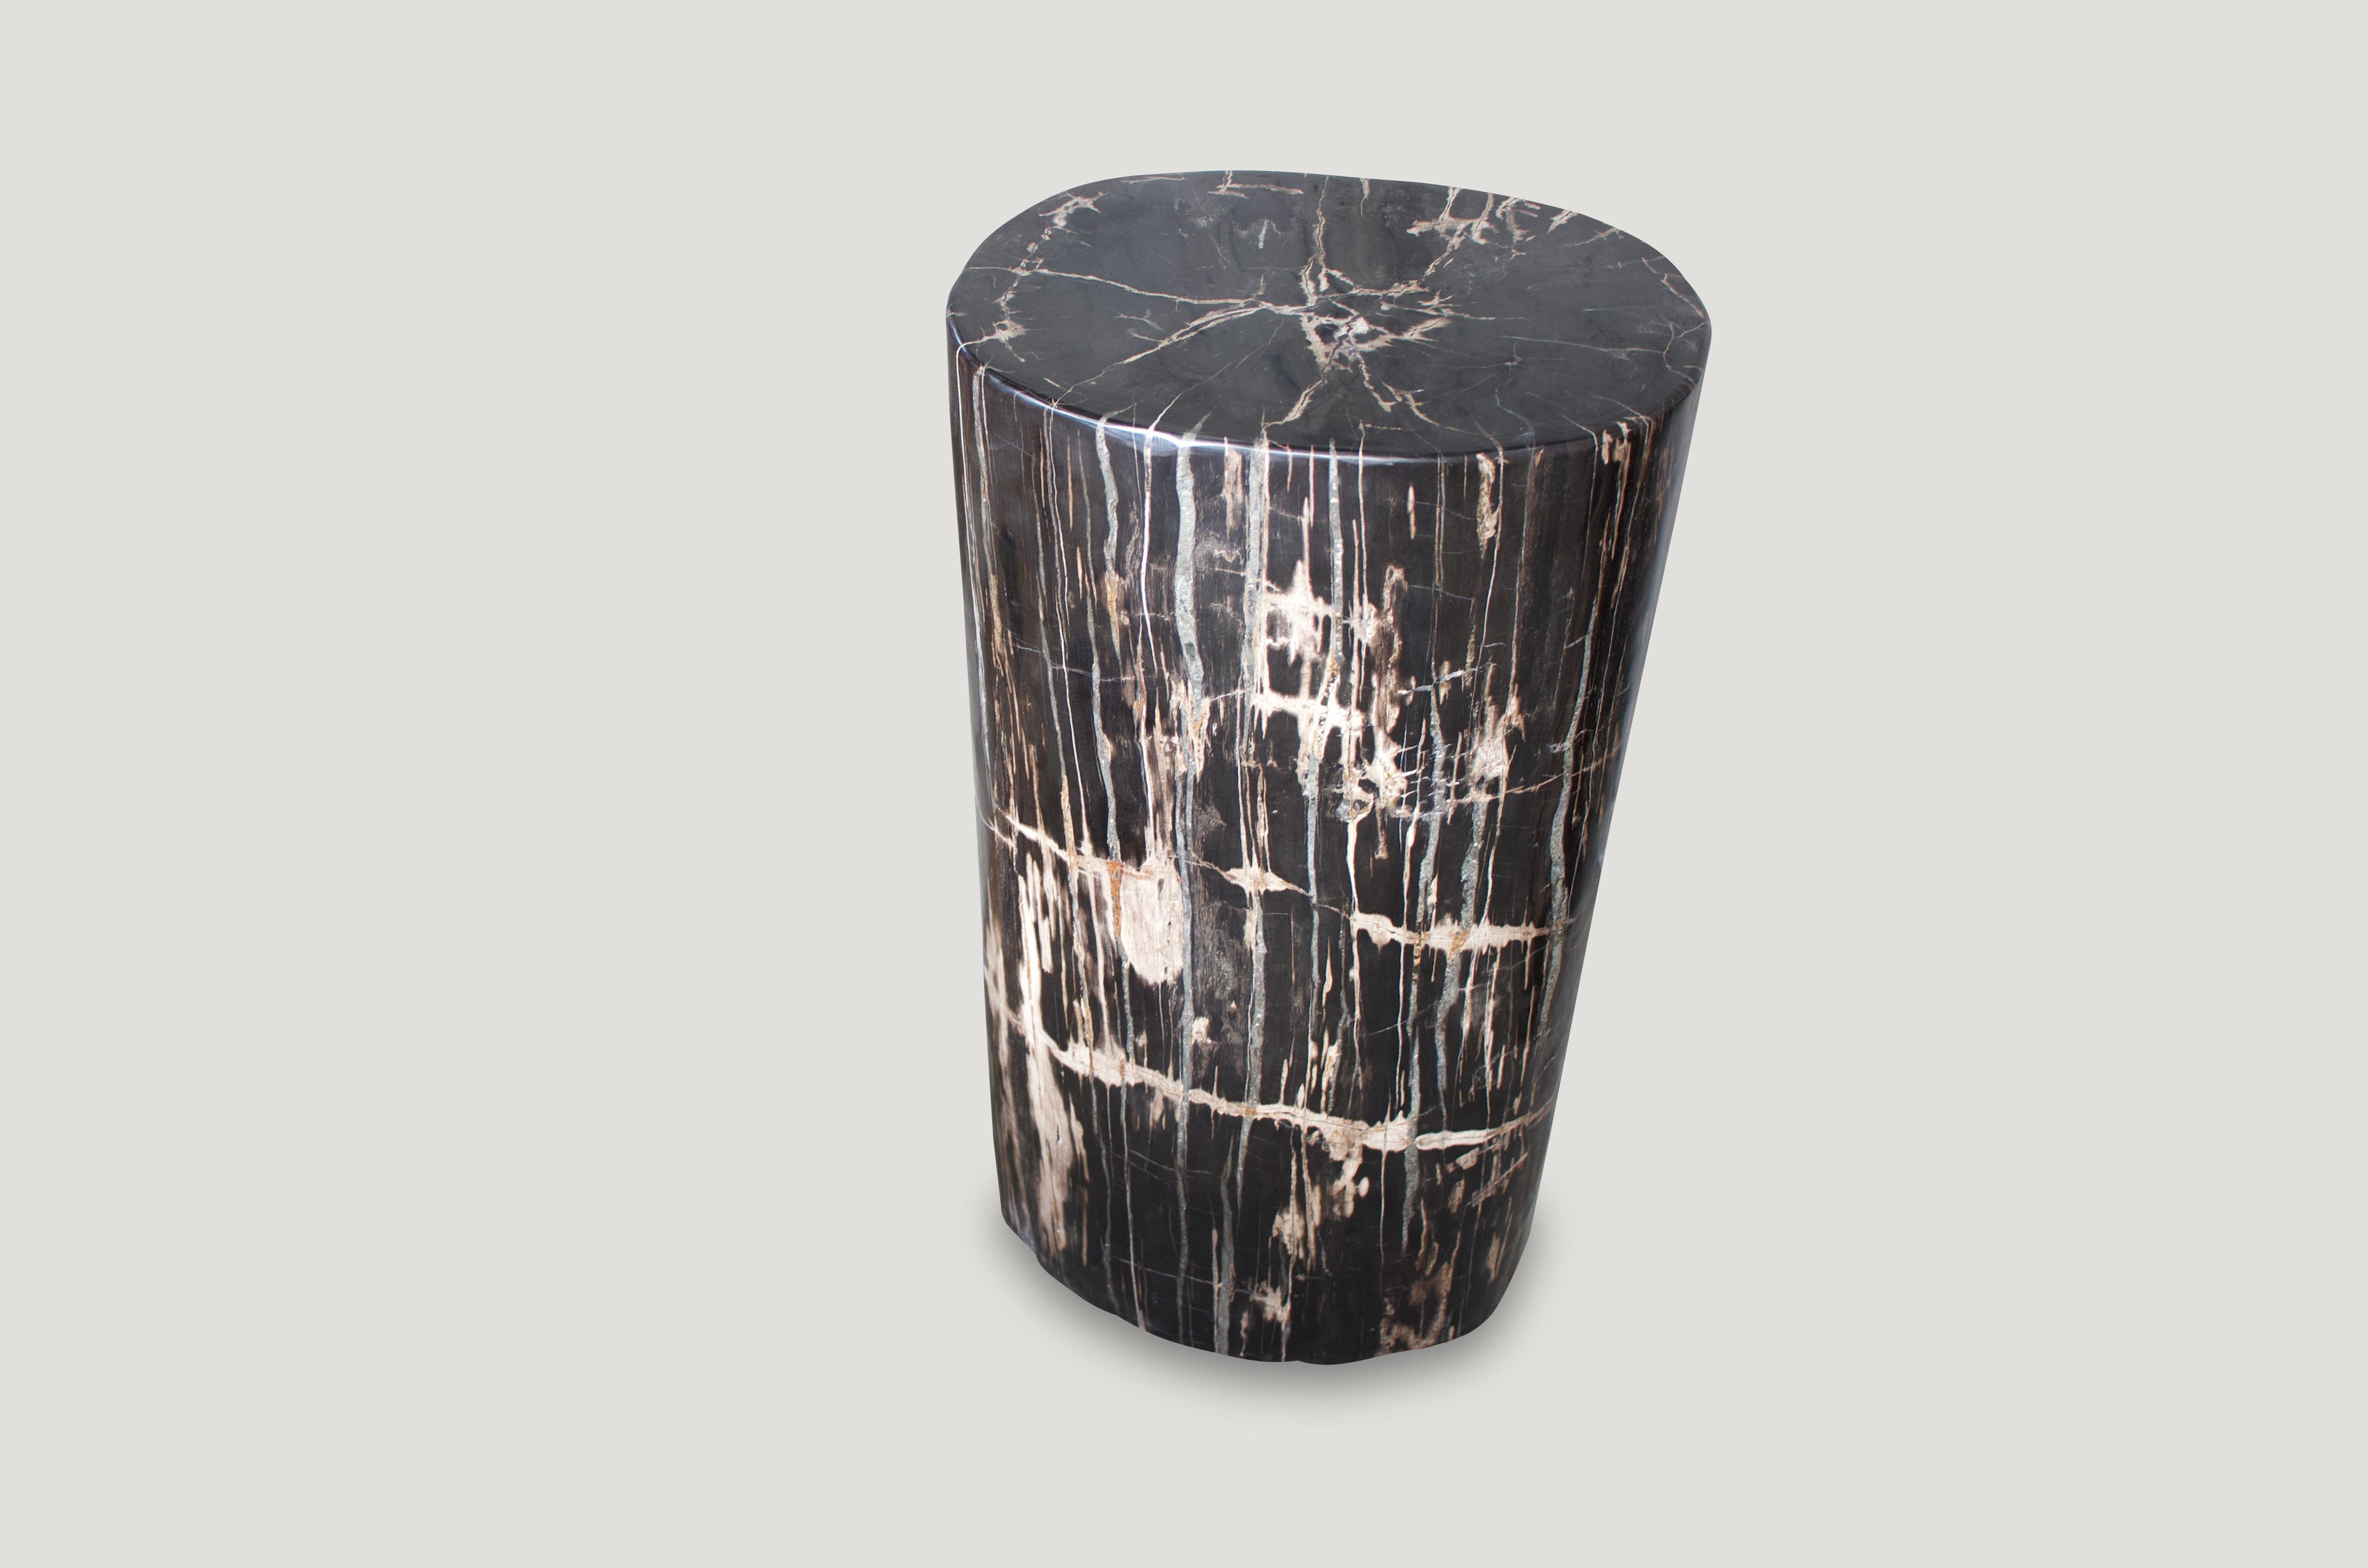 Stunning, black and beige, high quality petrified wood side table or pedestal. It’s fascinating how Mother Nature produces these stunning 40 million year old petrified teak logs with such contrasting colors with natural patterns throughout. Modern